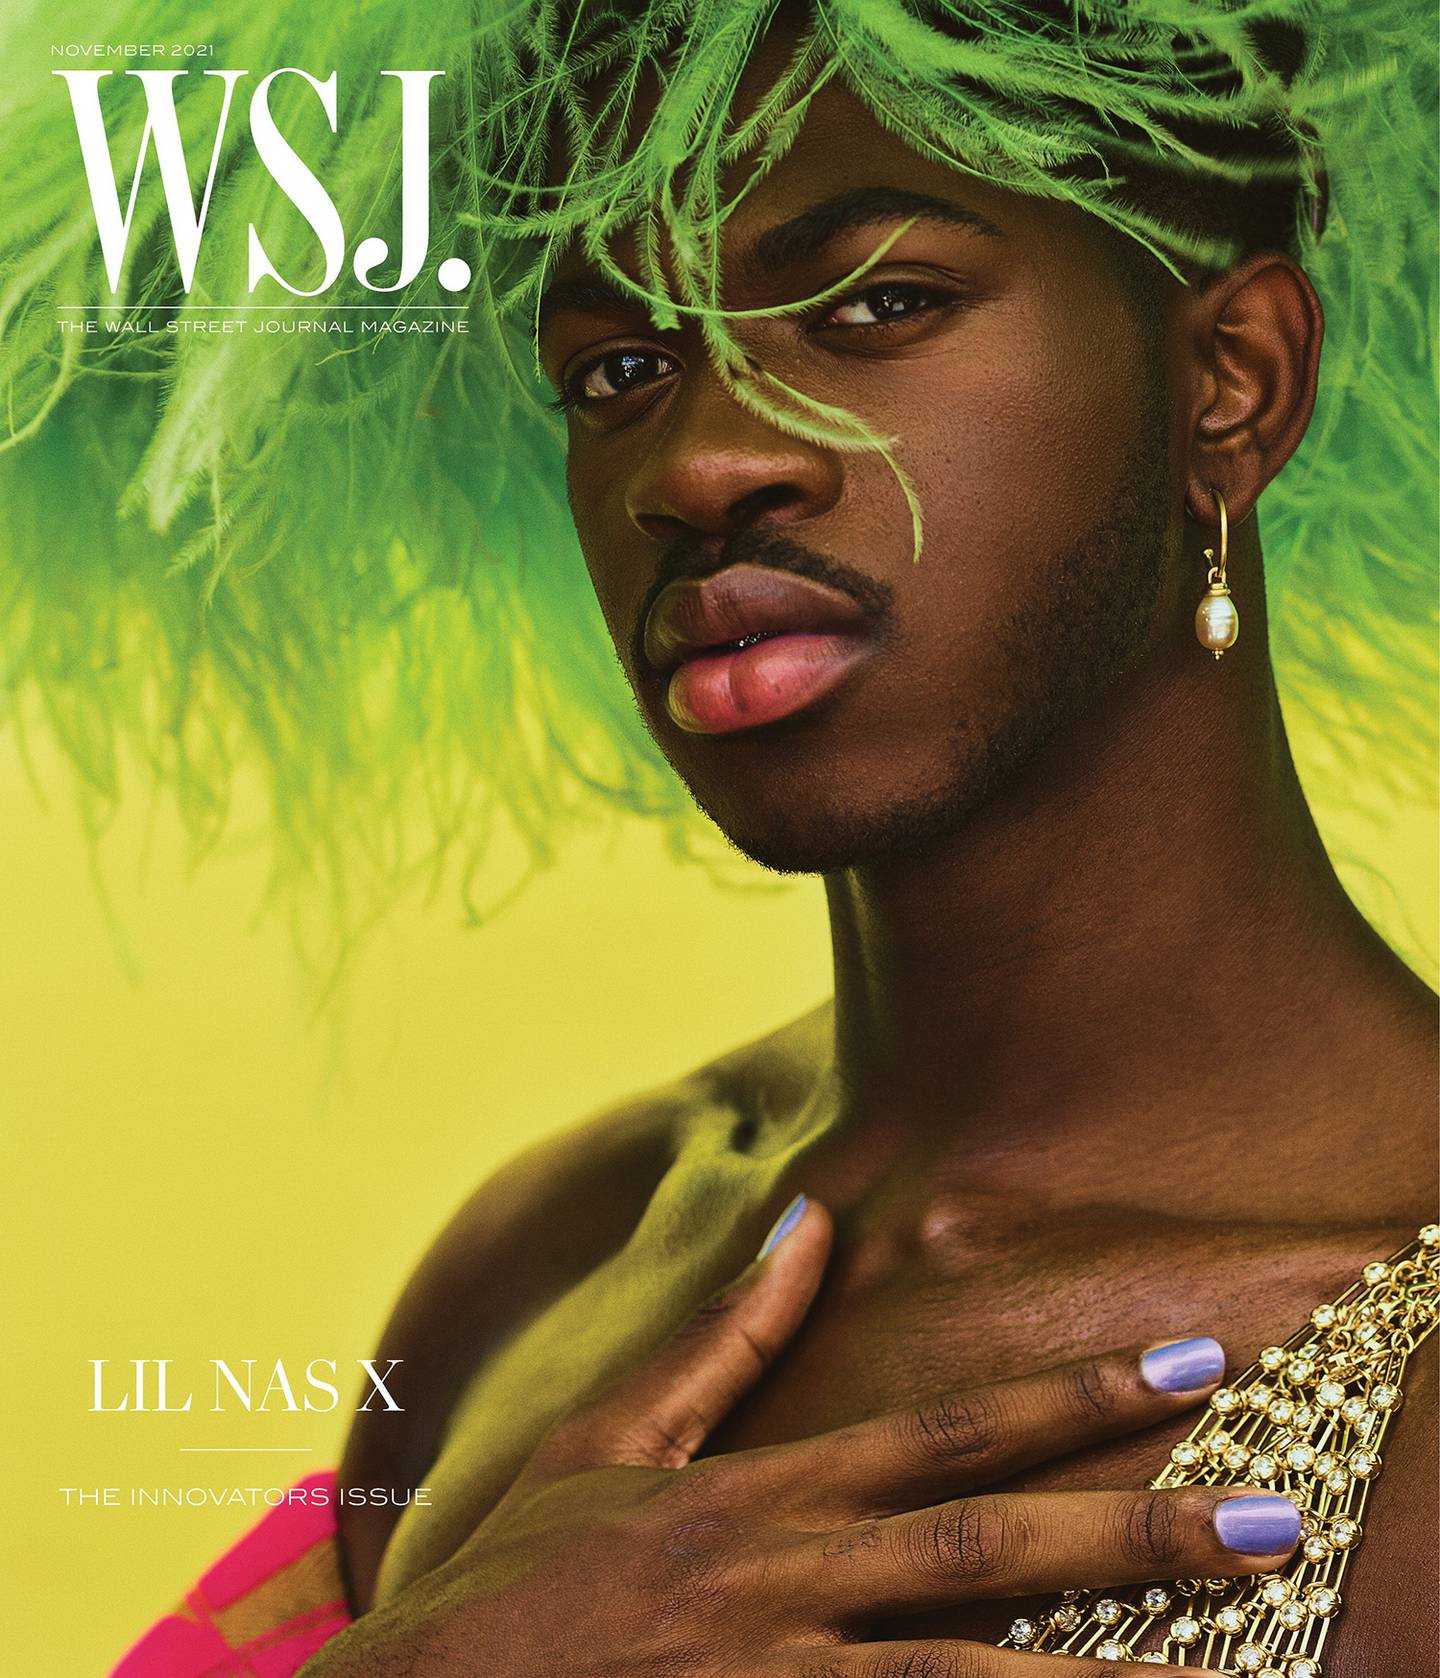 Lil Nas X on the cover of WSJ's 'Innovators' issue wearing Pechuga Vintage hat. Photo / Supplied